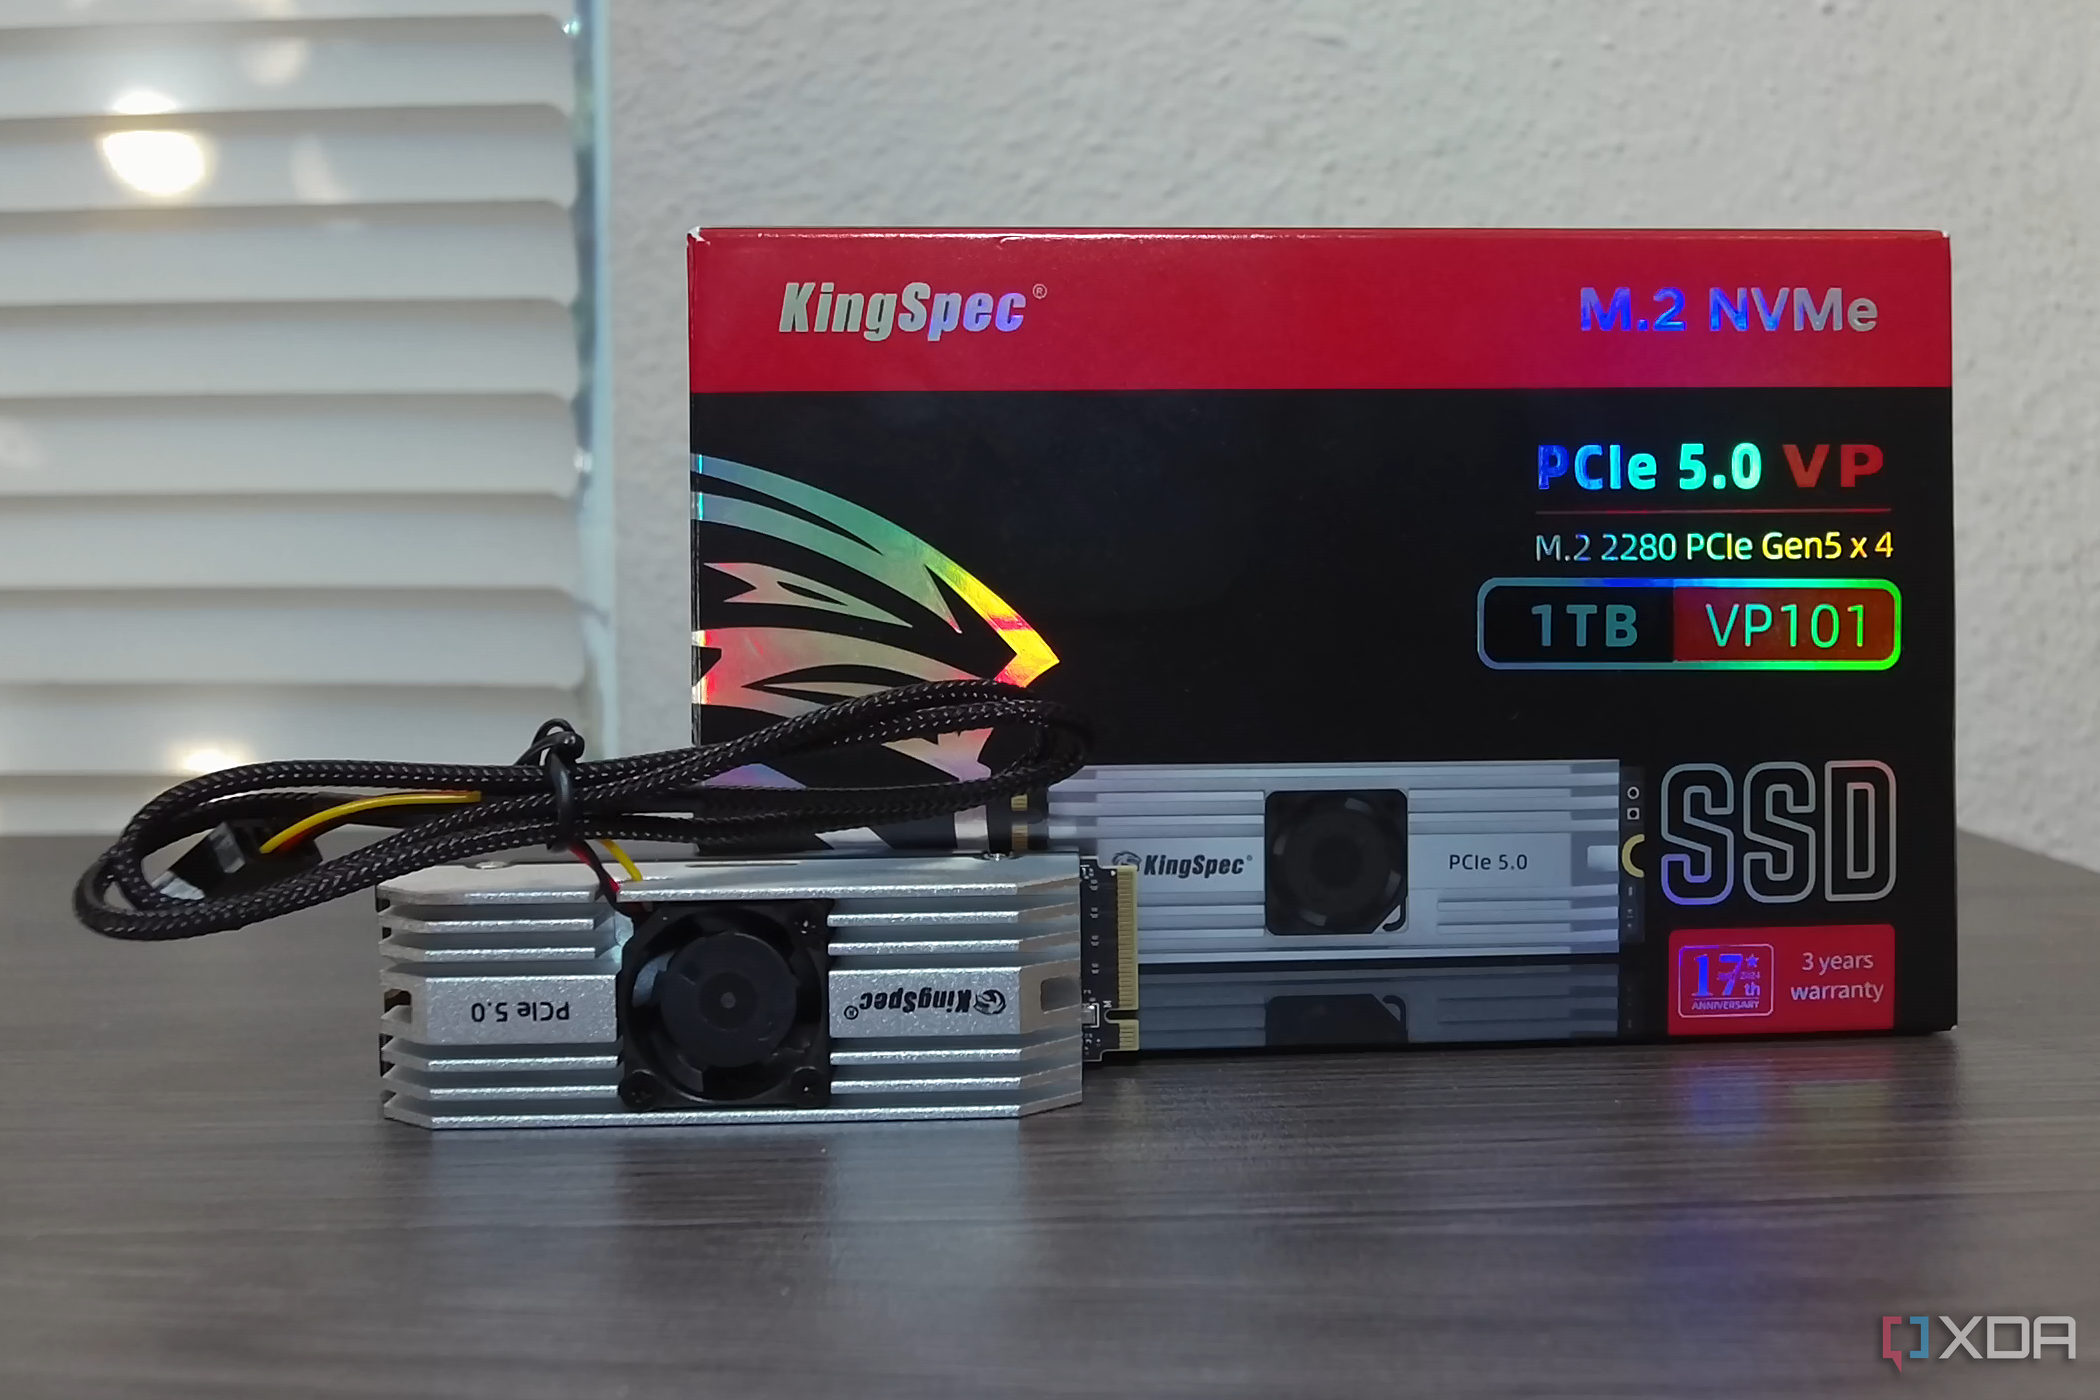 KingSpec VP101 SSD and box.